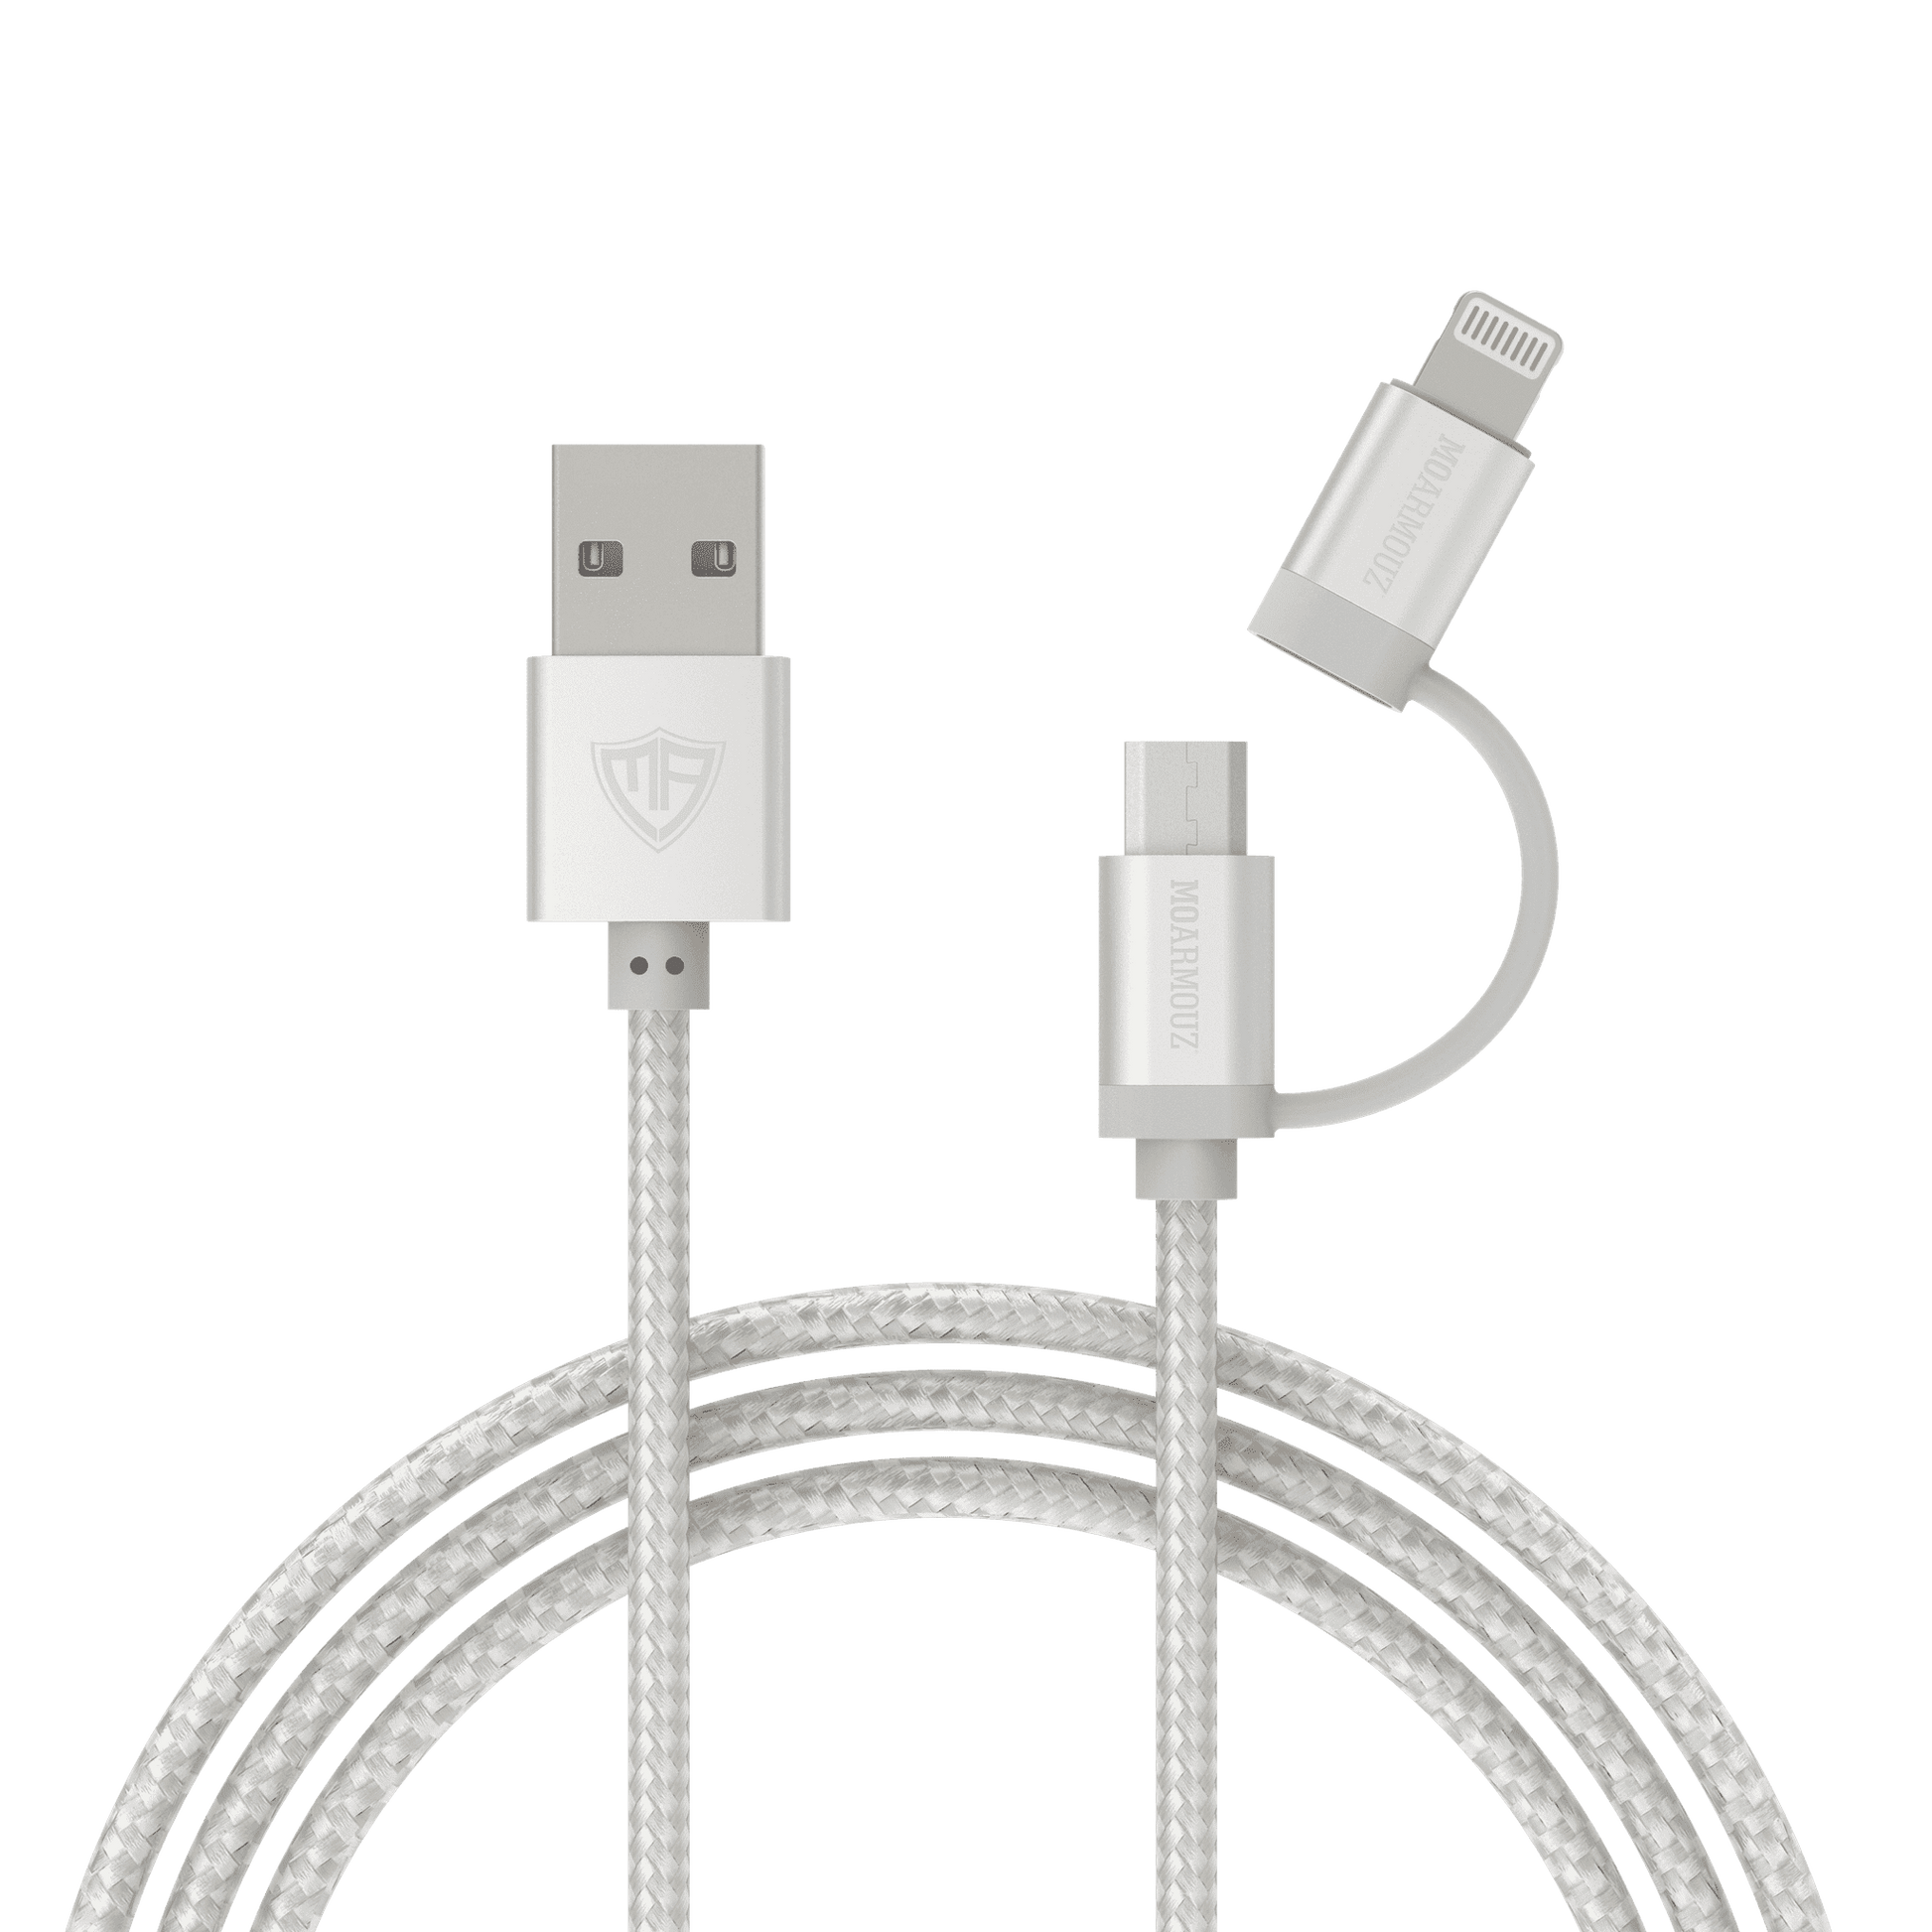 MoArmouz - 2 in 1 Braided MFI Certified Lightning and Micro USB Cable